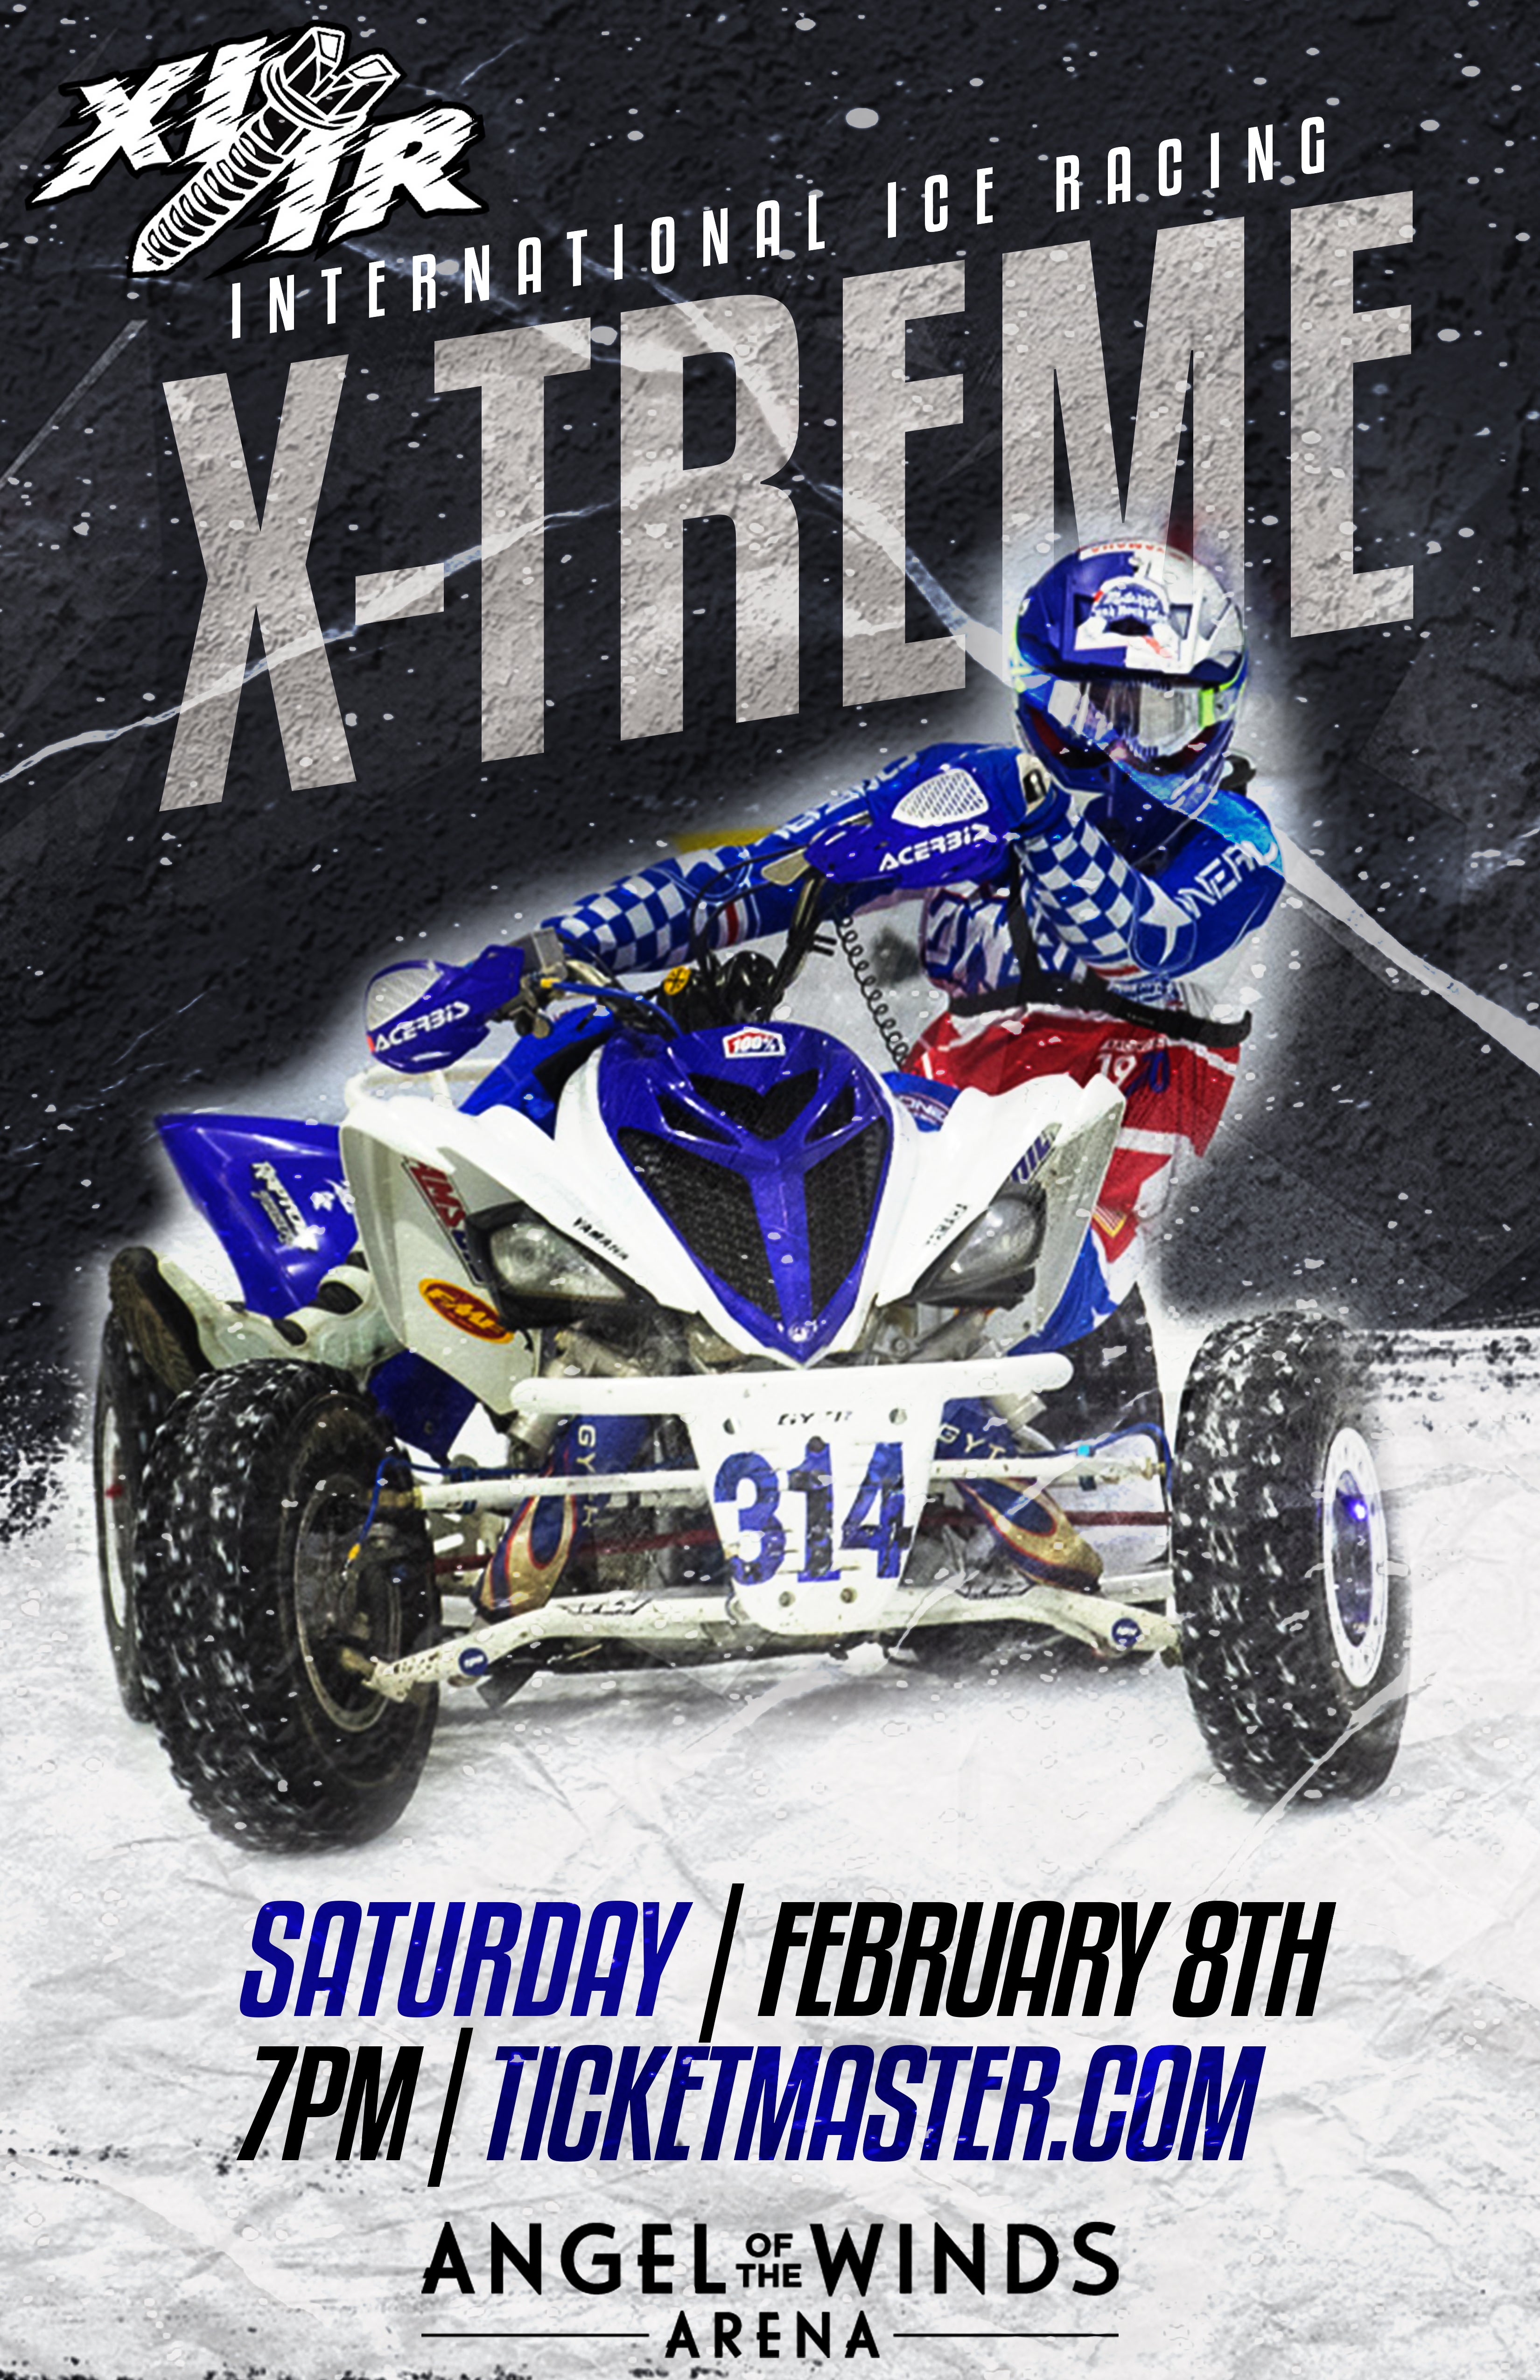 More Info for X-Treme International Ice Racing